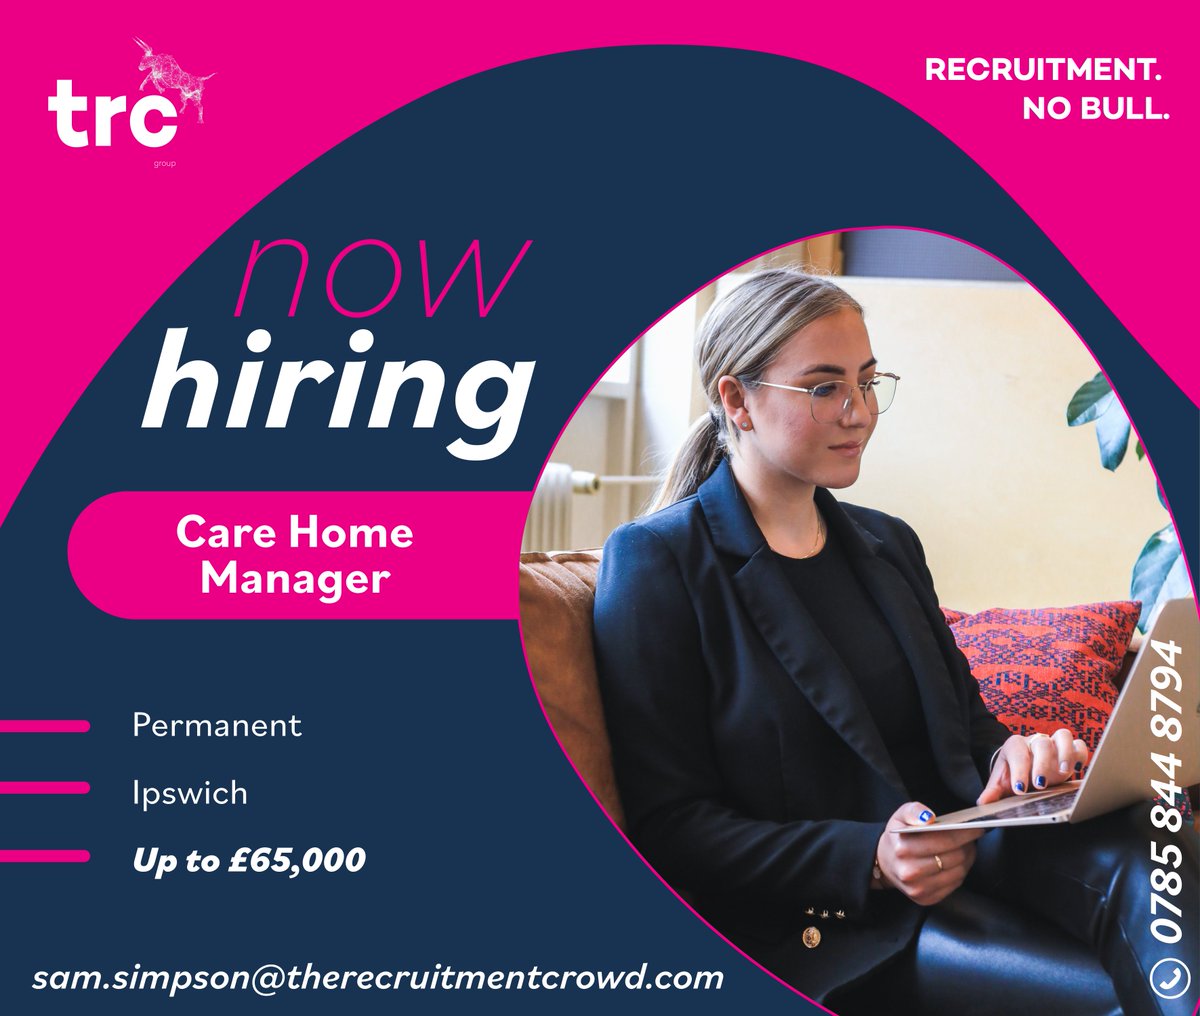 Our client is looking to recruit a Care Home Manager based in Ipswich.

Interested? Get in touch with Sam Simpson or see our other vacancies via our website 👉 therecruitmentcrowd.com/job-search/ 
 #CareHomeManager #Ipswich #Hiring